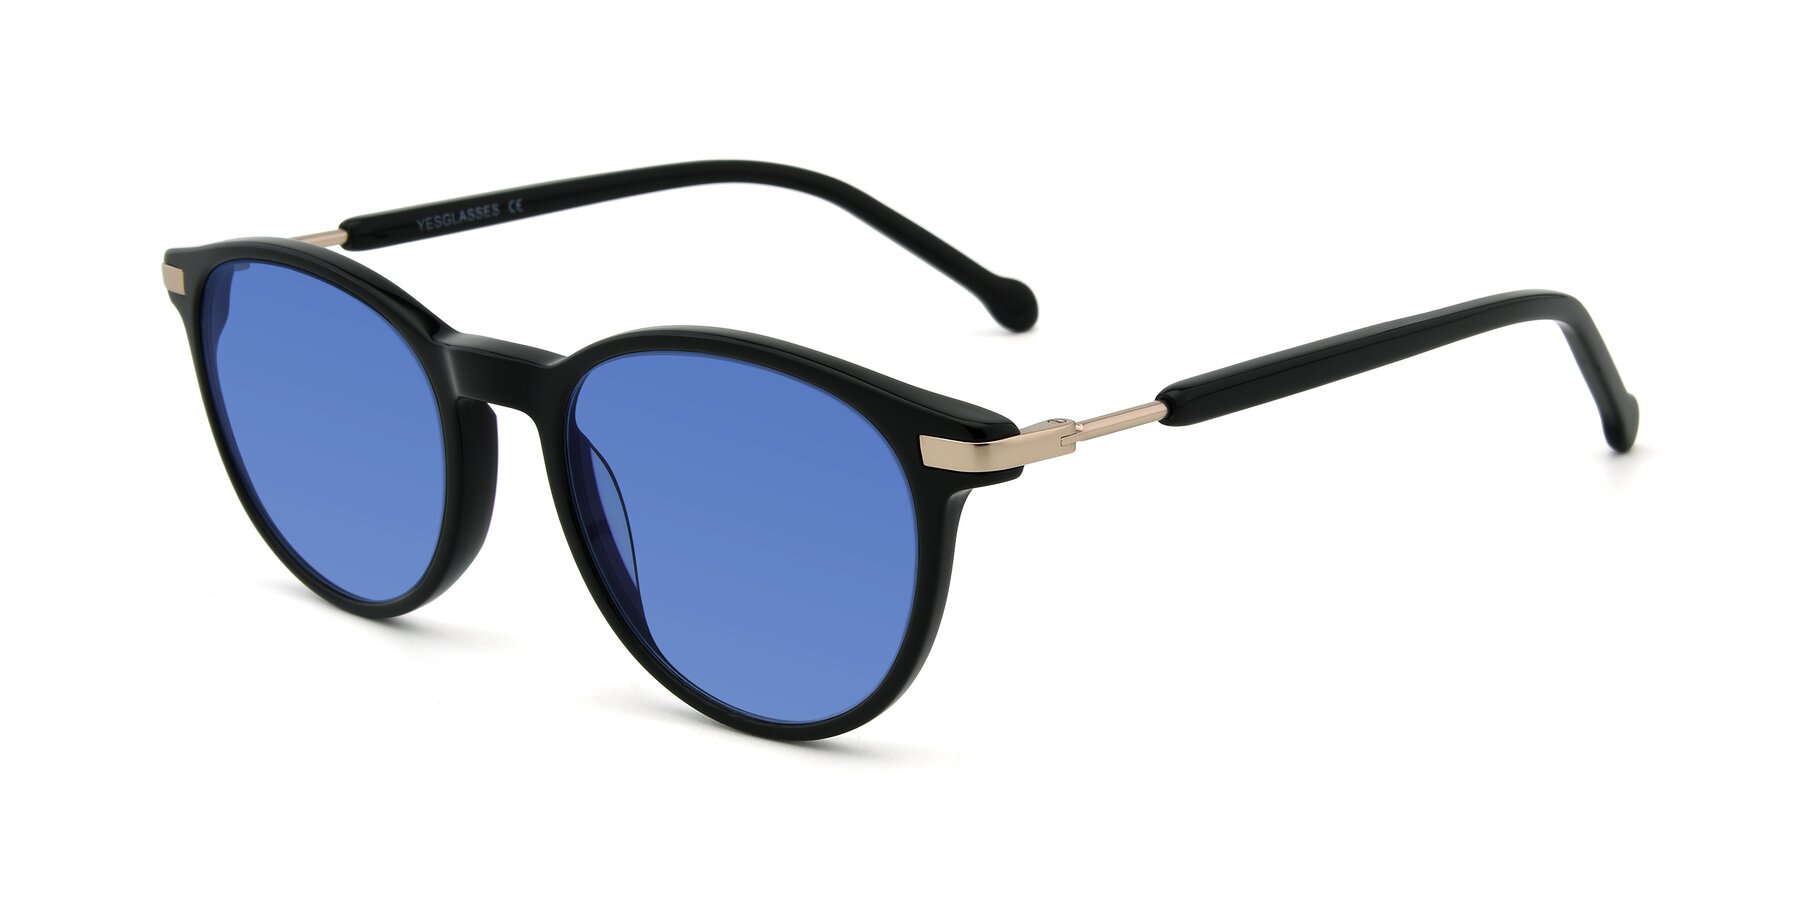 Angle of 17429 in Black with Blue Tinted Lenses